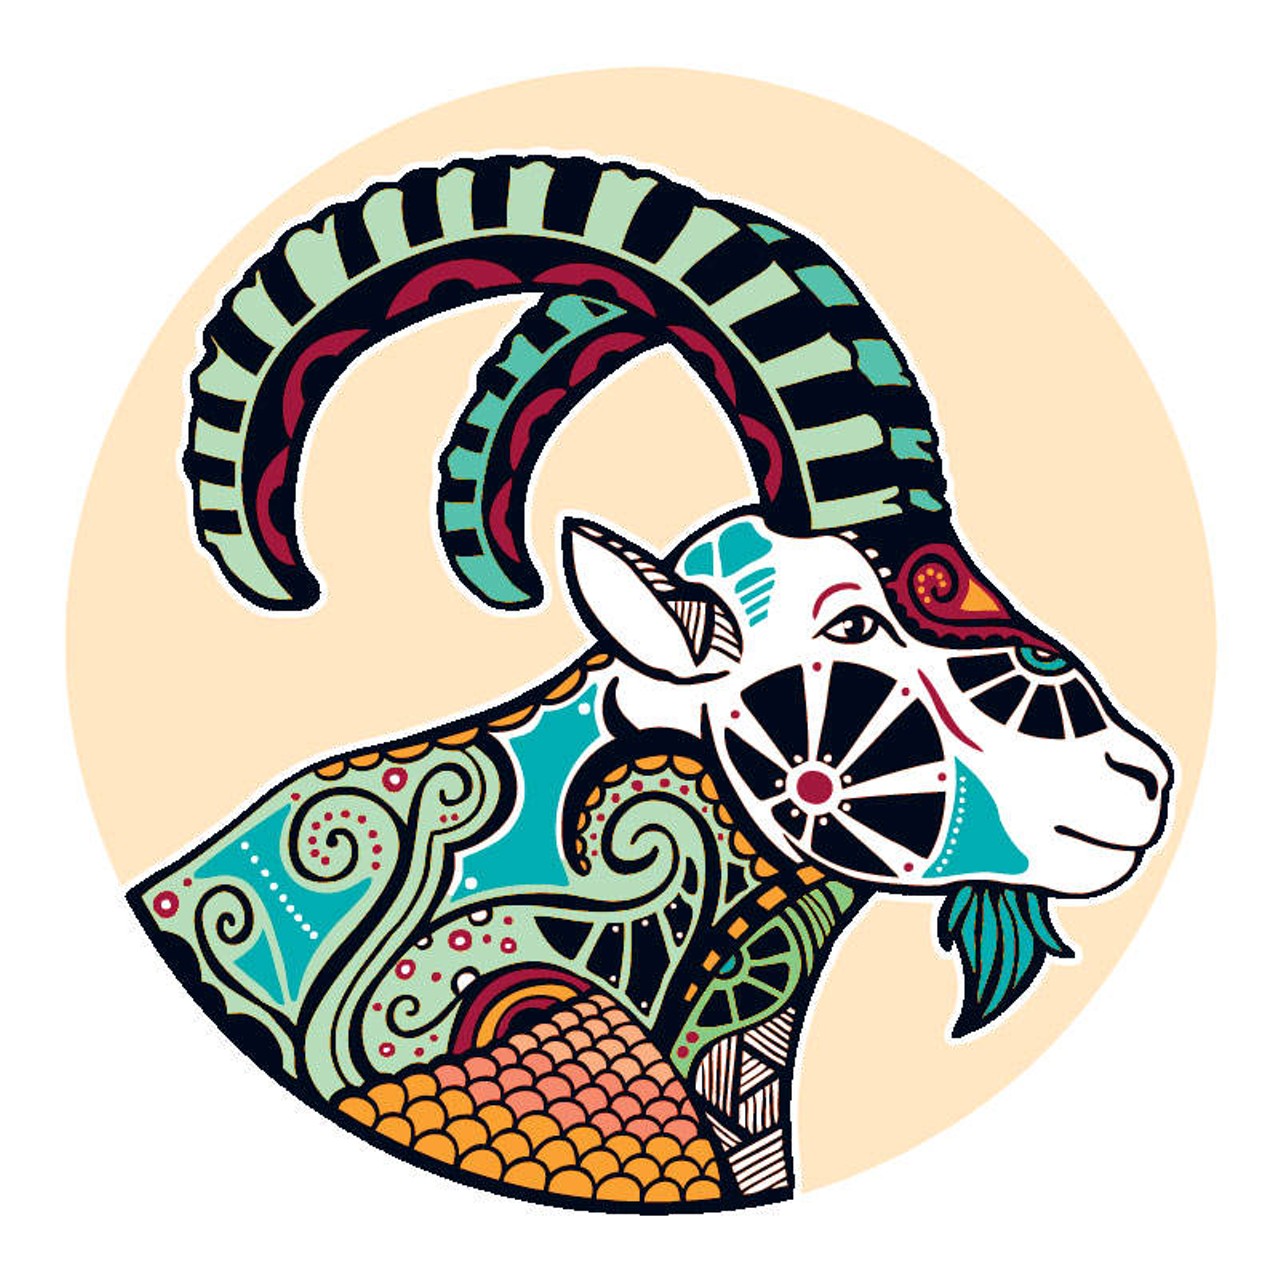 CAPRICORN (Dec. 21-Jan. 20): 
Against all odds you&#146;ve been able to take charge of your life and make things work. Your ability to handle just about anything is astounding. Many of you are on top of the world, in good shape to take what you&#146;ve created to the next level. Your interactions with close others have tested your trust issues to the max. At this point you have enough faith to feel safe in this situation. Those of you who have yet to sense that it&#146;ll be smooth sailing from here on out could be troubled by factors that keep you anxious about ghosts from the past who could surface and ruin your plans.